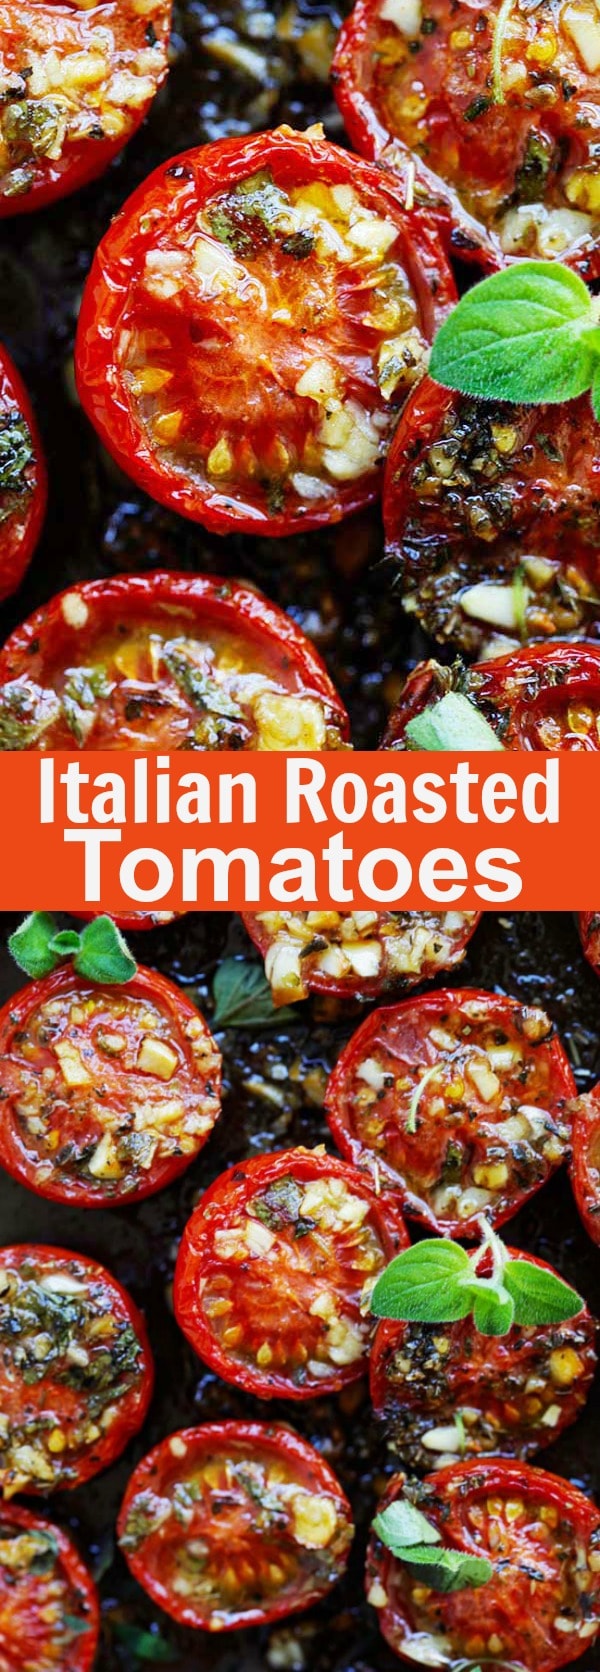 Italian roasted tomatoes - the best roasted tomatoes recipe with garlic, olive oil, Italian seasoning and oregano. These perfect oven roasted tomatoes take only 10 mins active time | rasamalaysia.com